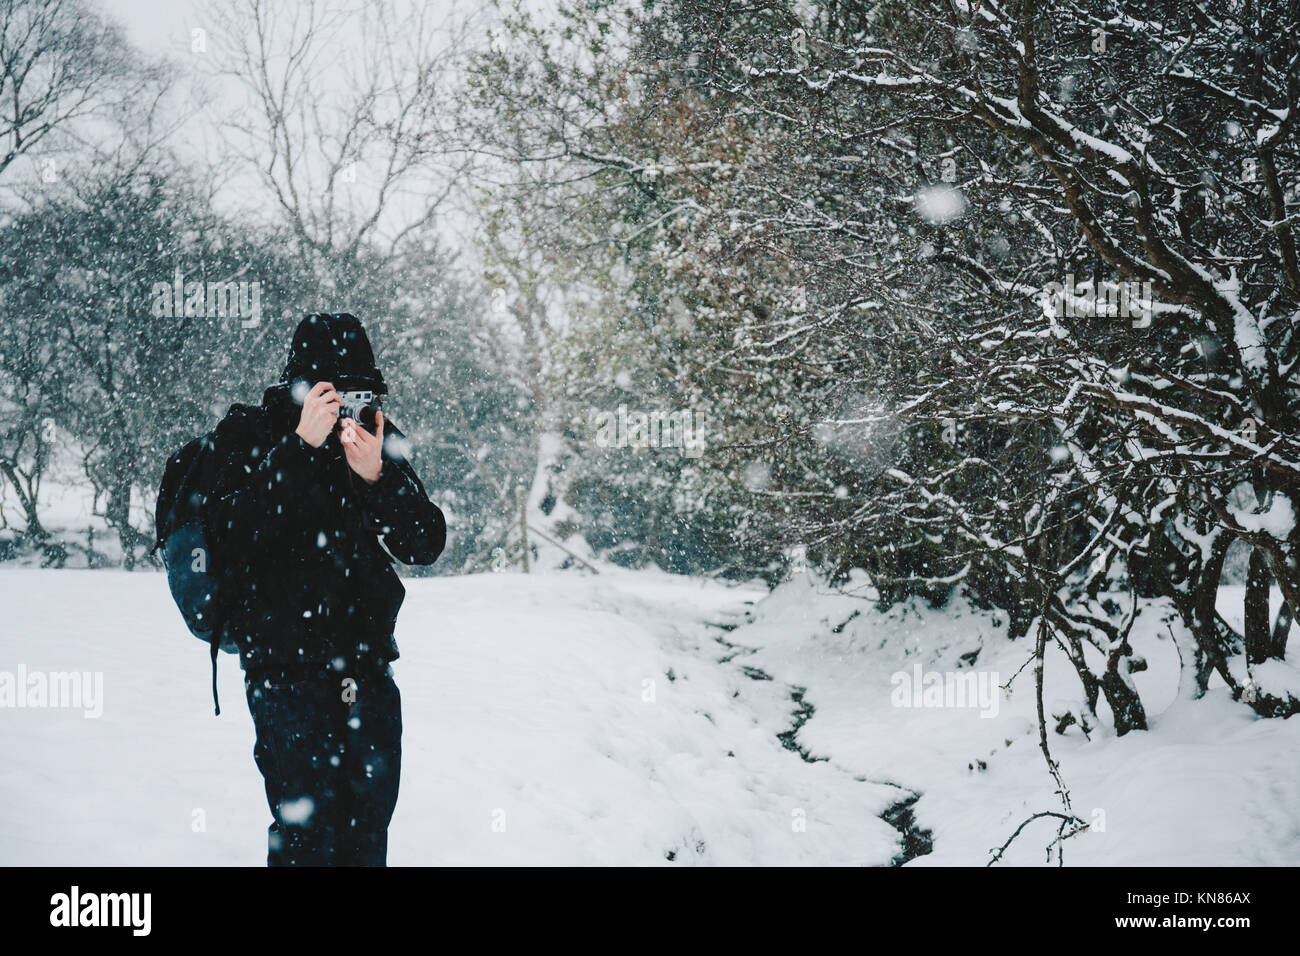 A photographer in the snow. Peak District, Edale, England. 9th December, 2017. Severe weather conditions. Snow in the Peak District, Edale, England. Credit: Cristina Pedreira/Alamy Live News Stock Photo